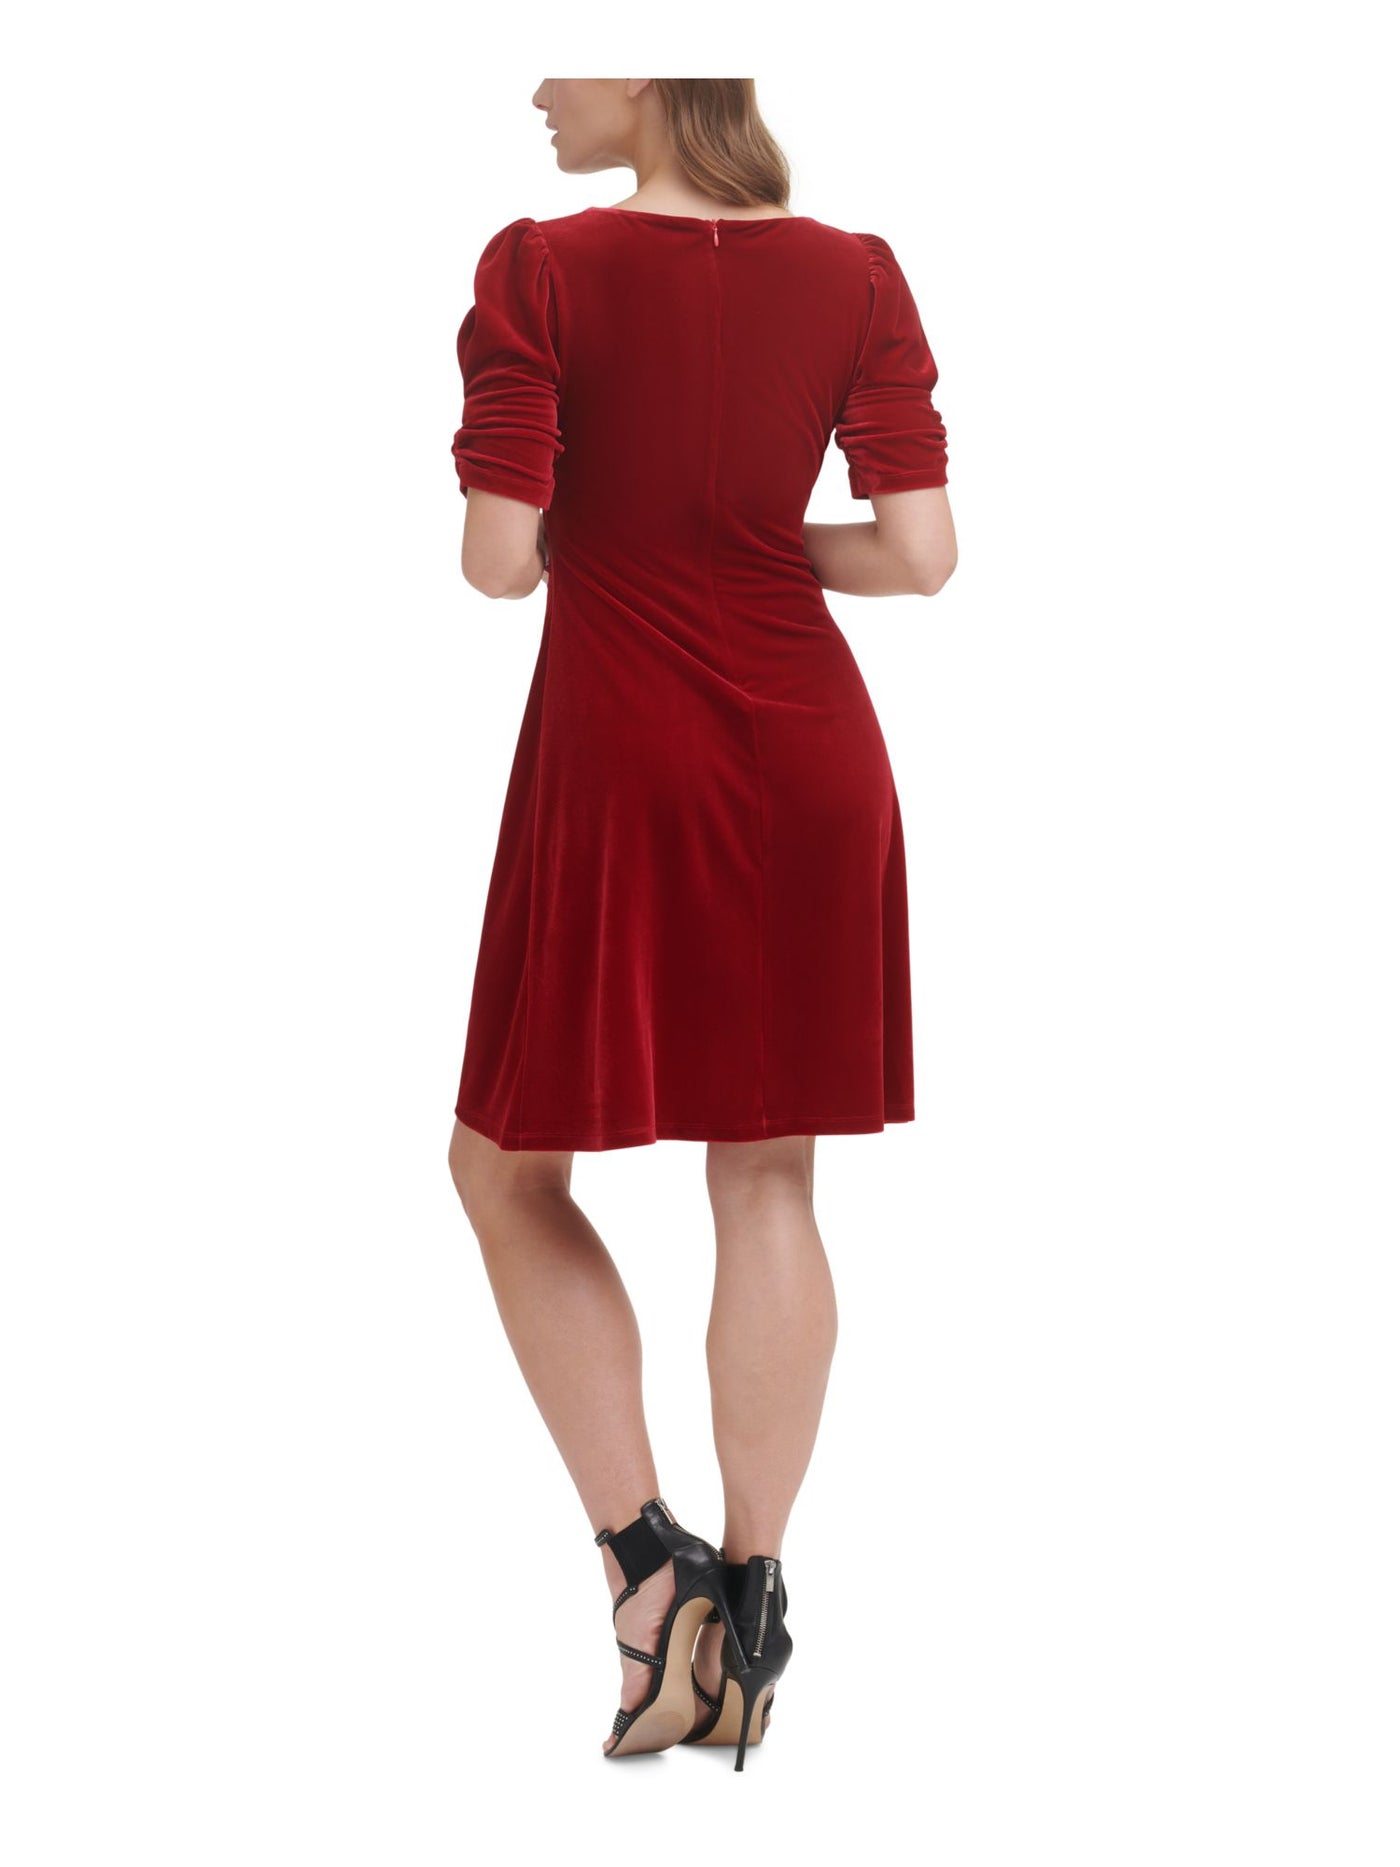 DKNY Womens Red Ruched Zippered Velvet Textured Pouf Sleeve V Neck Knee Length Party Sheath Dress 10